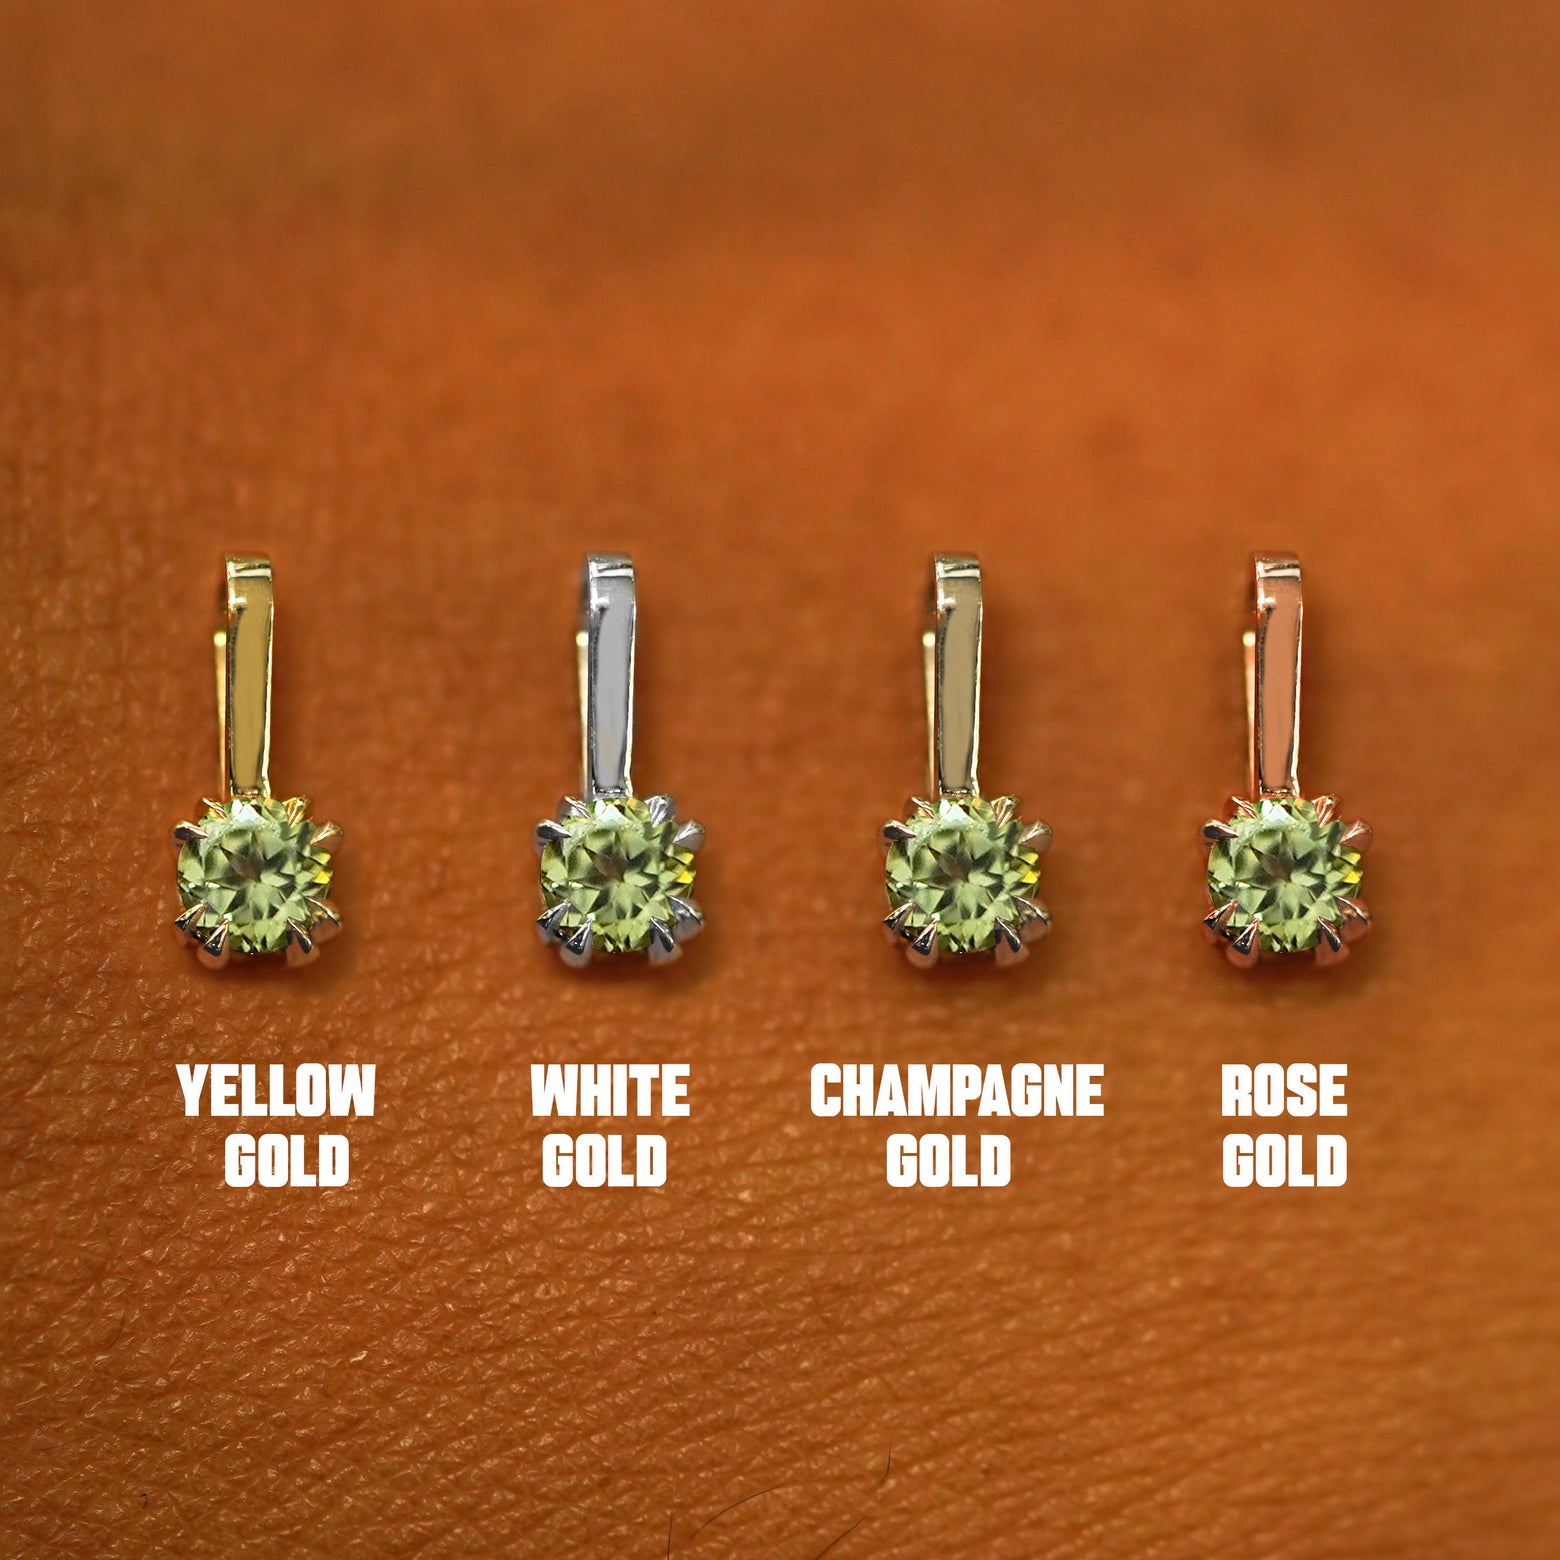 Four versions of the Peridot Charm shown in options of yellow, white, rose, and champagne gold